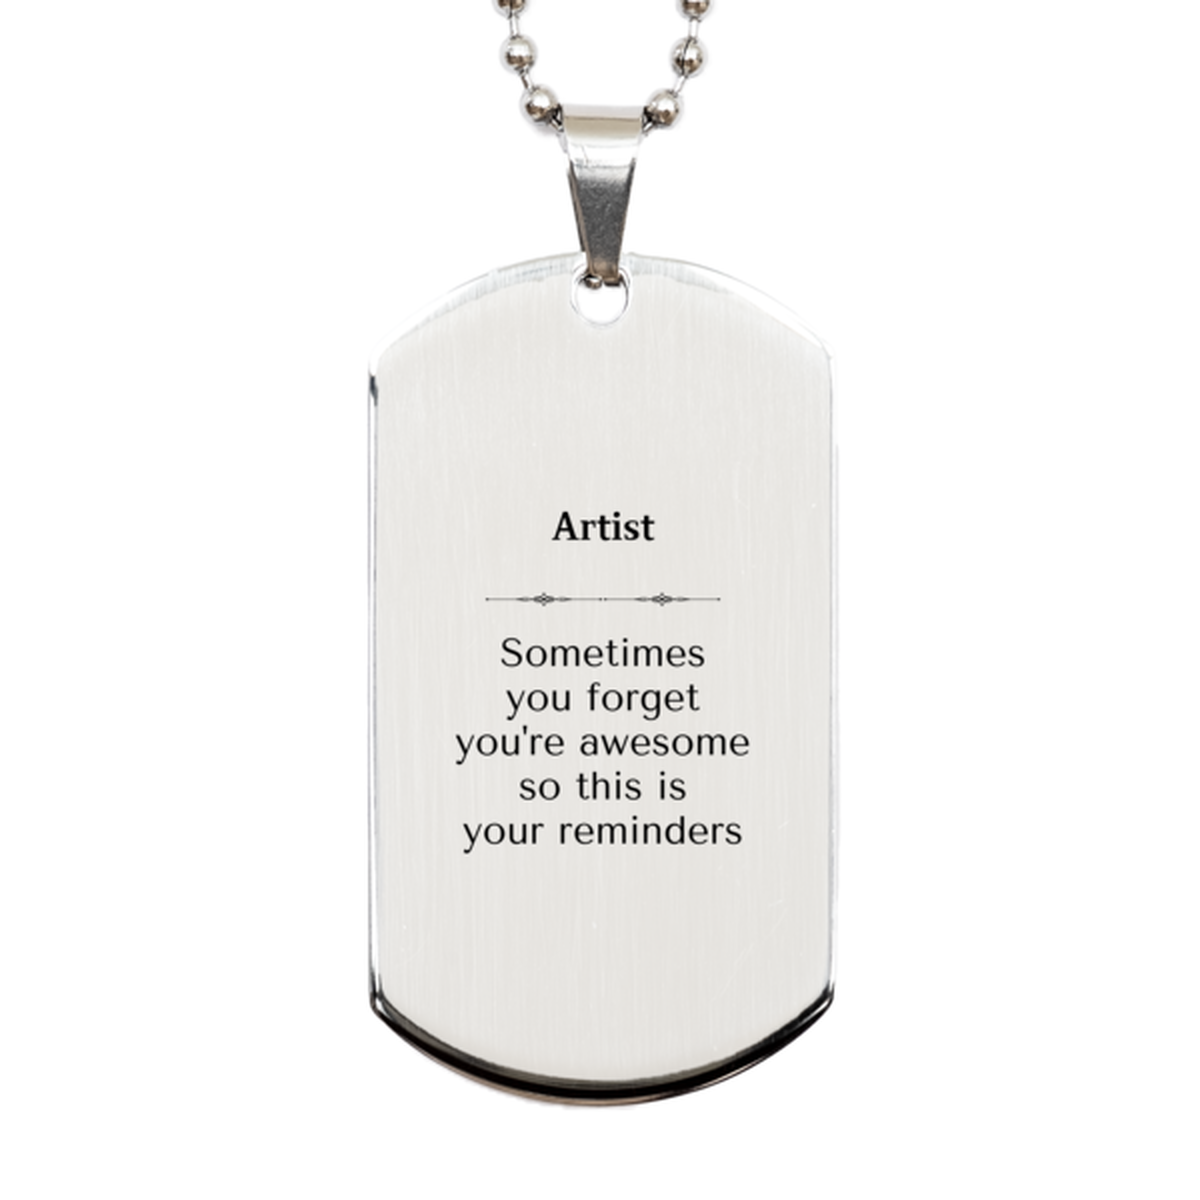 Sentimental Artist Silver Dog Tag, Artist Sometimes you forget you're awesome so this is your reminders, Graduation Christmas Birthday Gifts for Artist, Men, Women, Coworkers